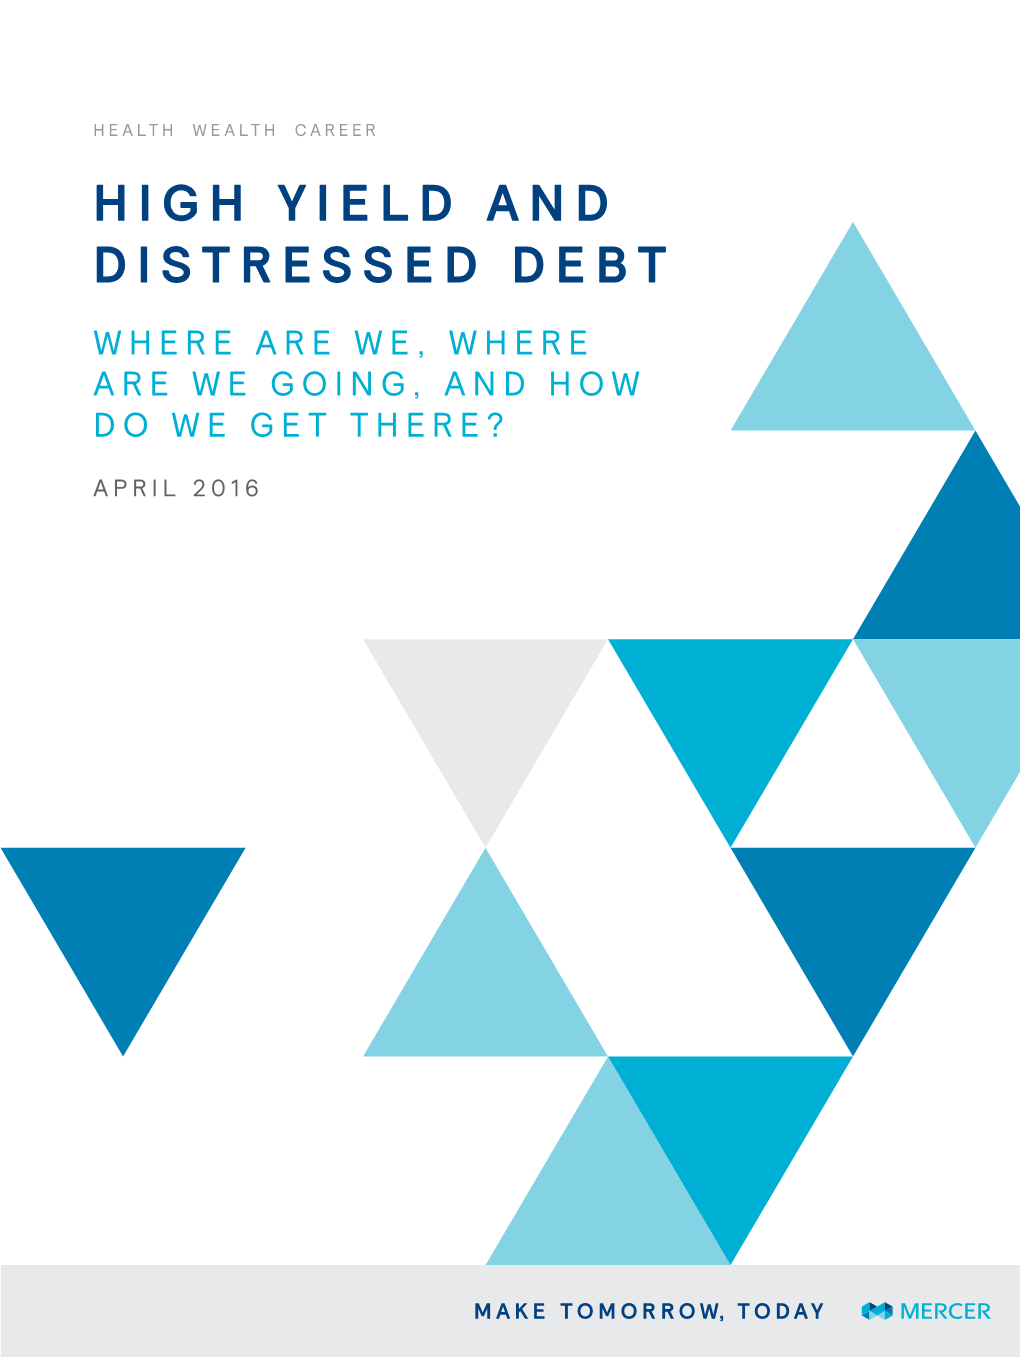 High Yield and Distressed Debt Where Are We, Where Are We Going, and How Do We Get There?